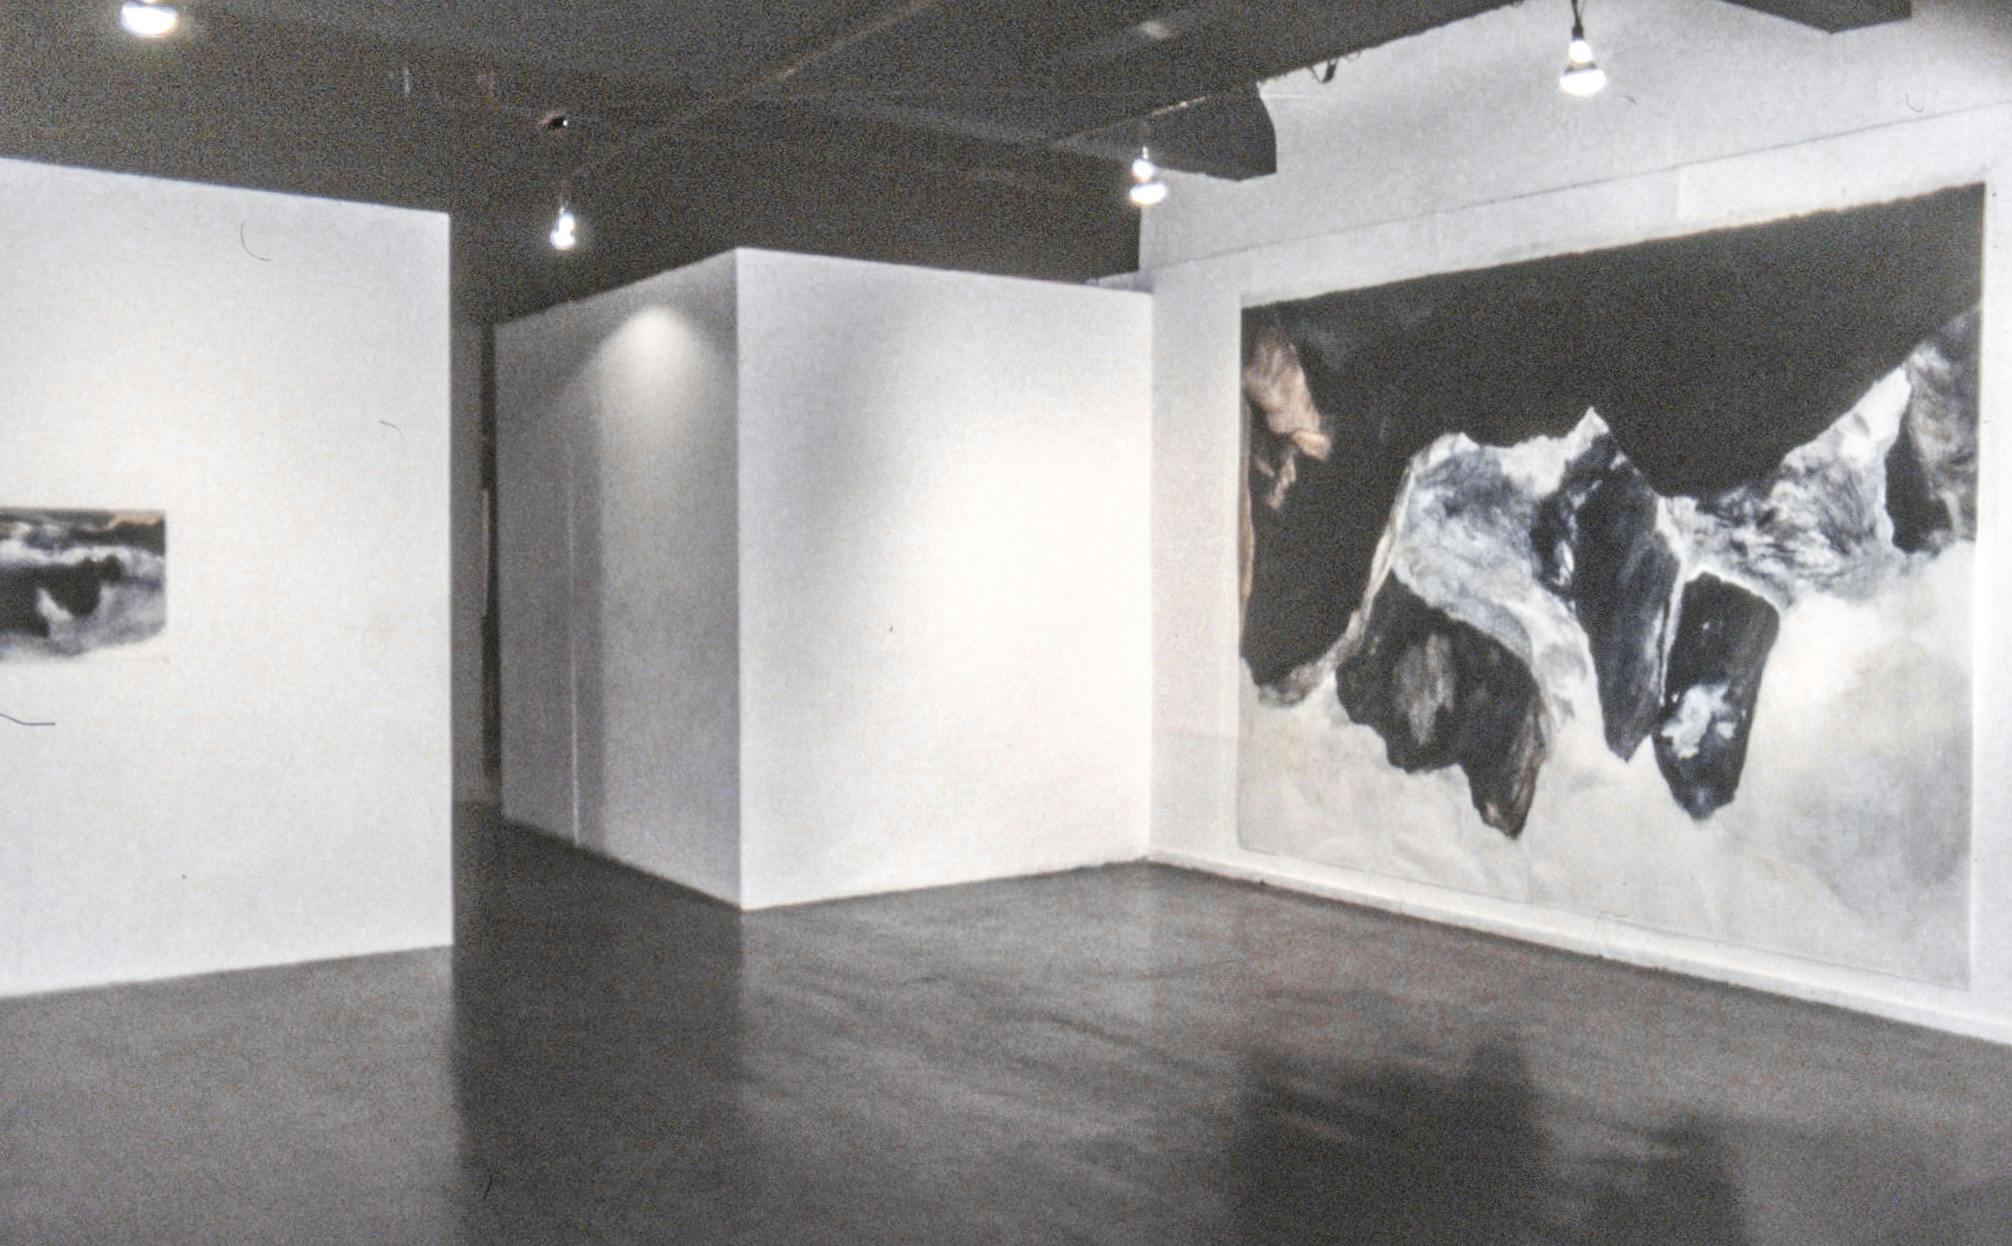 A gallery space with two visible drawings on the wall. One of them takes up nearly the whole wall, and the other is fairly small. Both drawings are black and white with mountainous forms.